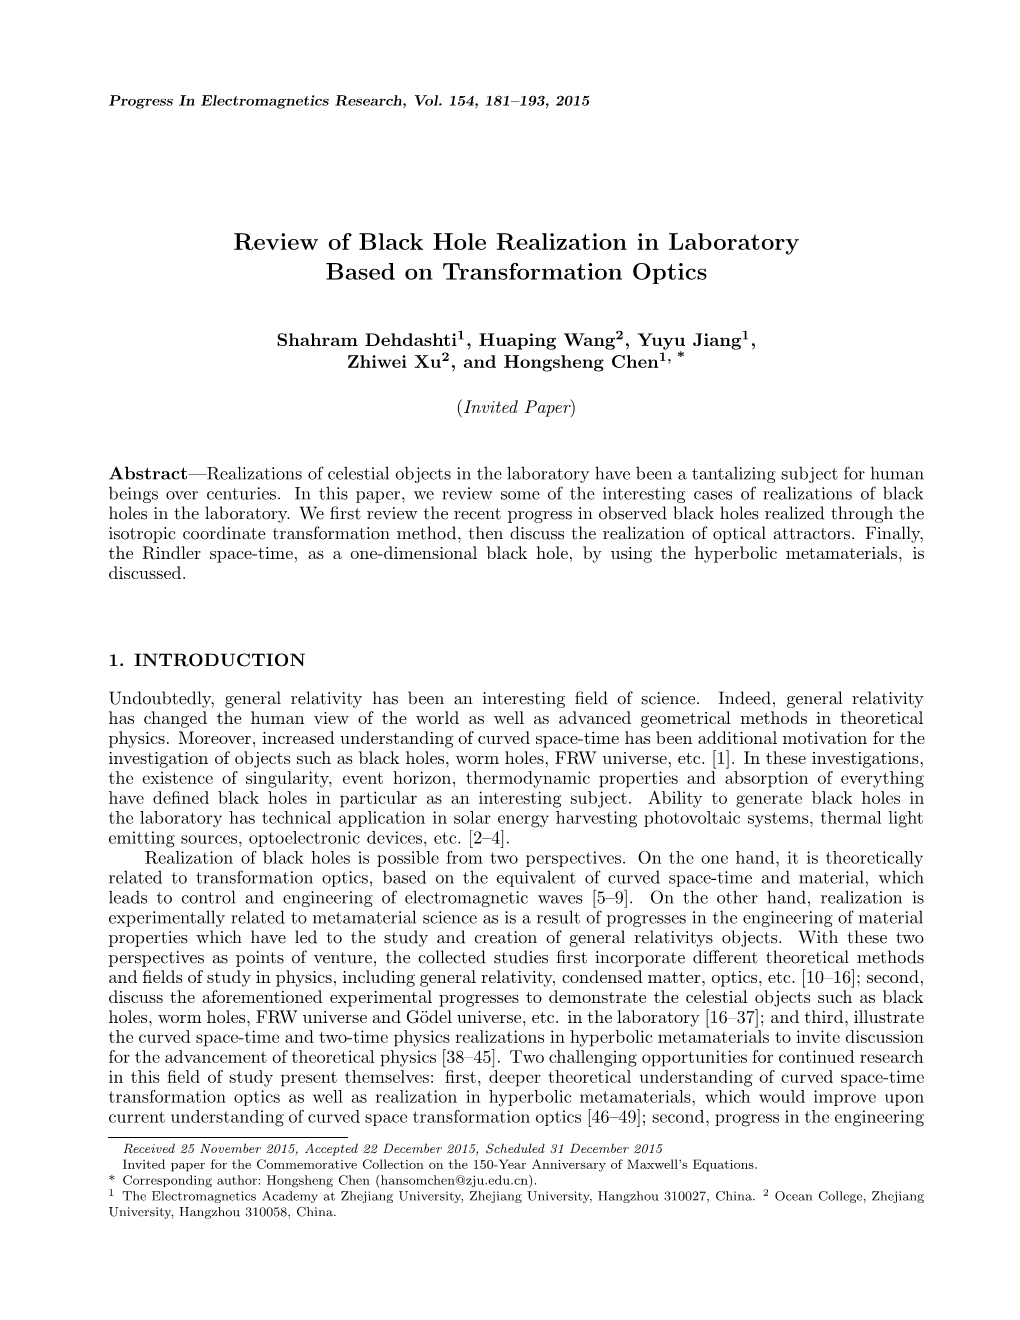 Review of Black Hole Realization in Laboratory Based on Transformation Optics